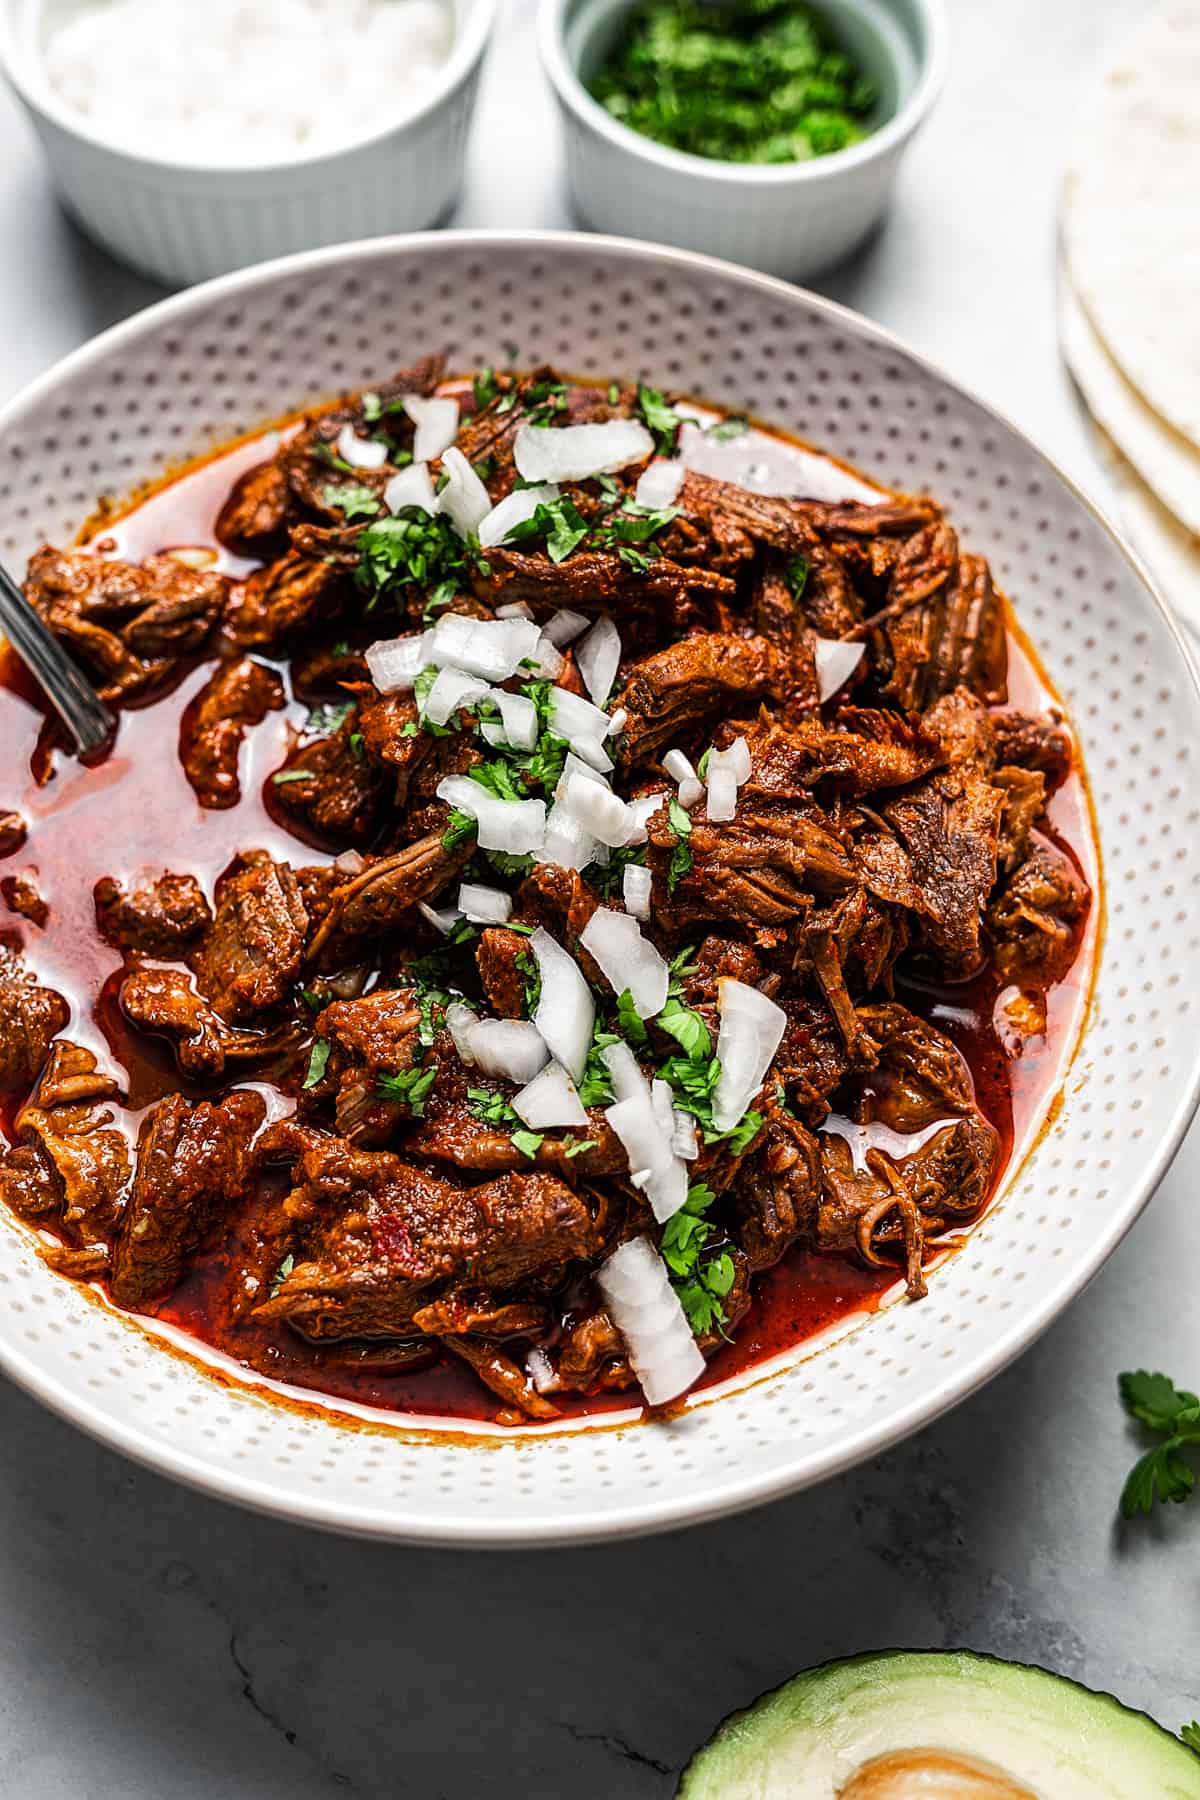 Beef birria in a serving dish.